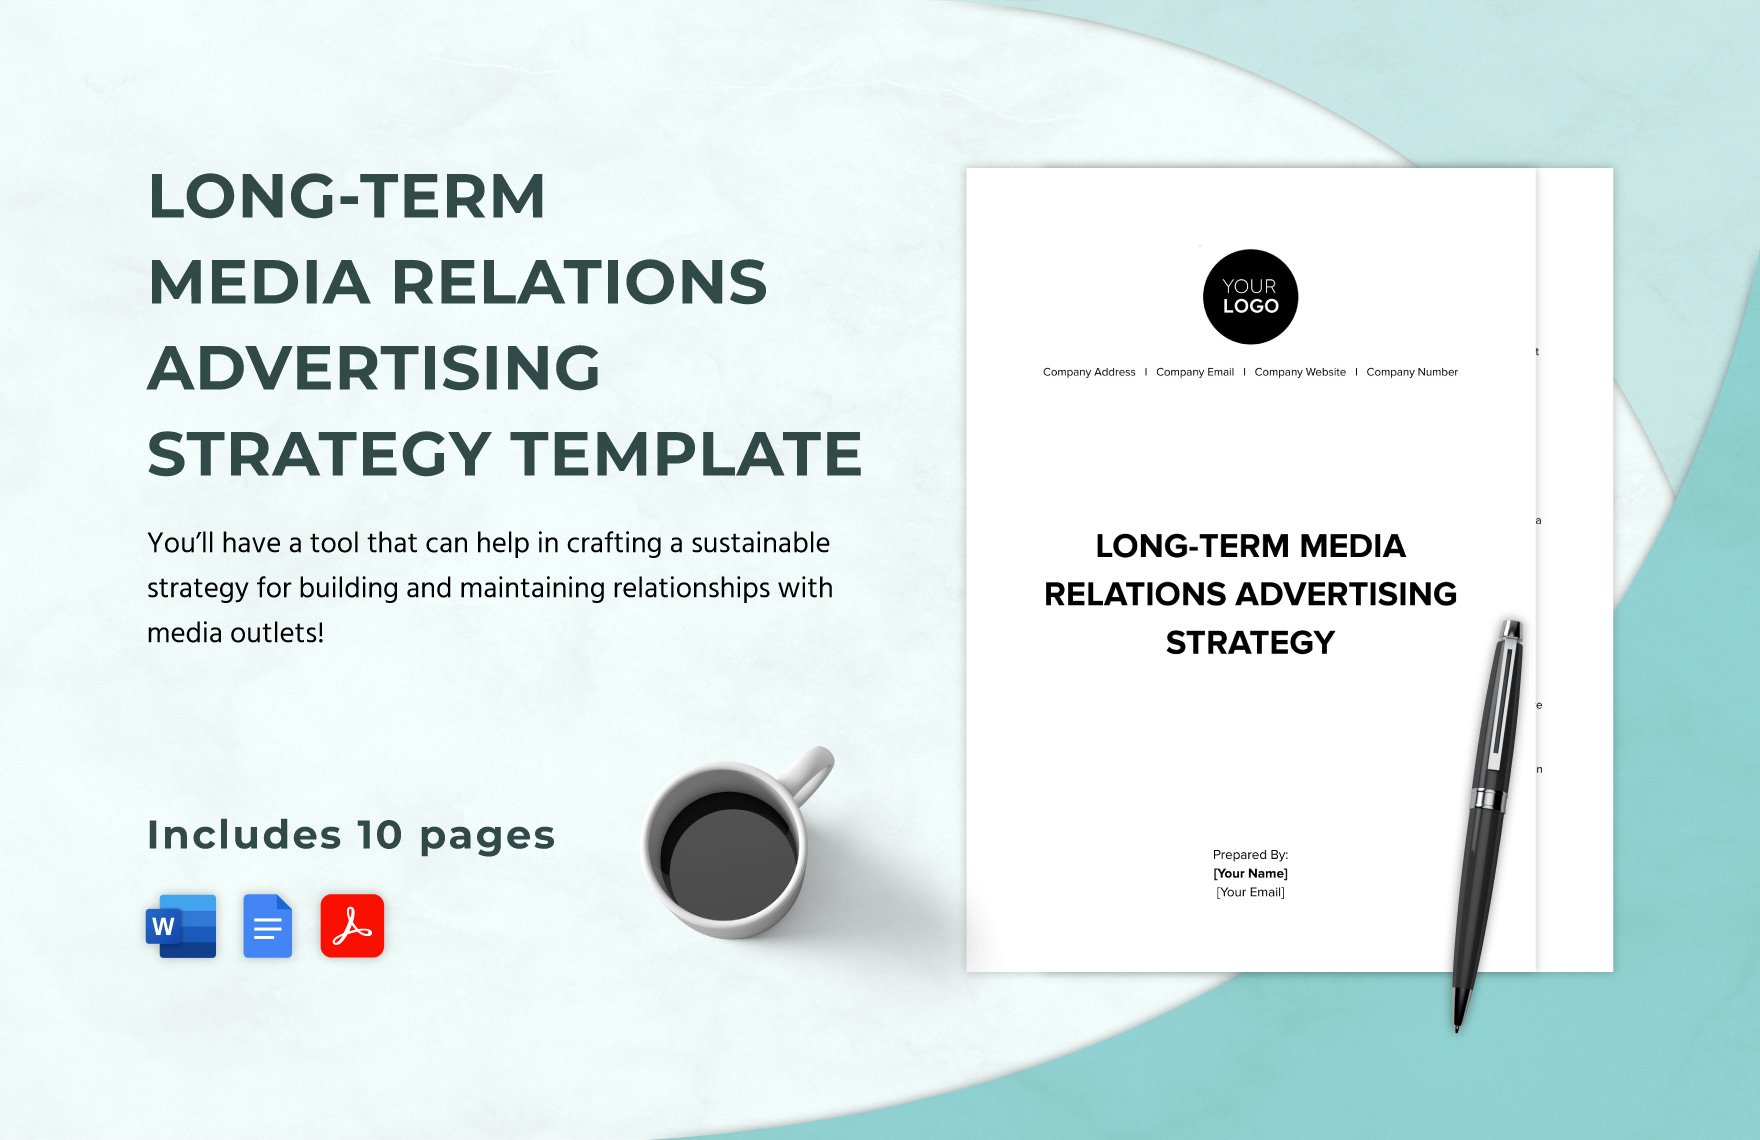 Long-Term Media Relations Advertising Strategy Template in Word, Google Docs, PDF